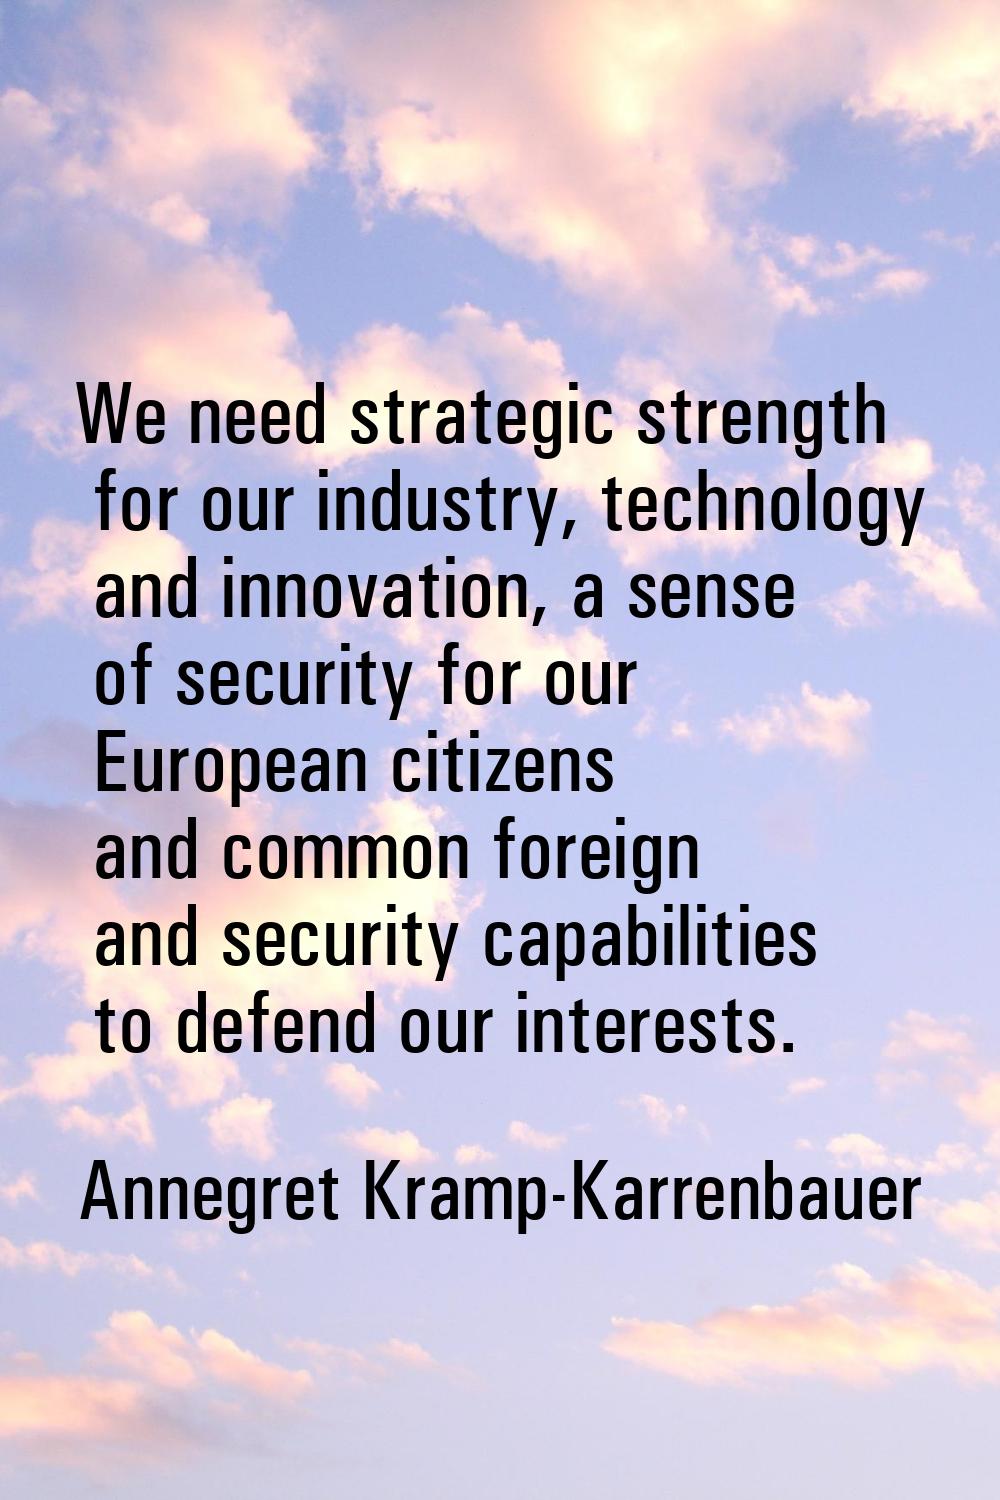 We need strategic strength for our industry, technology and innovation, a sense of security for our